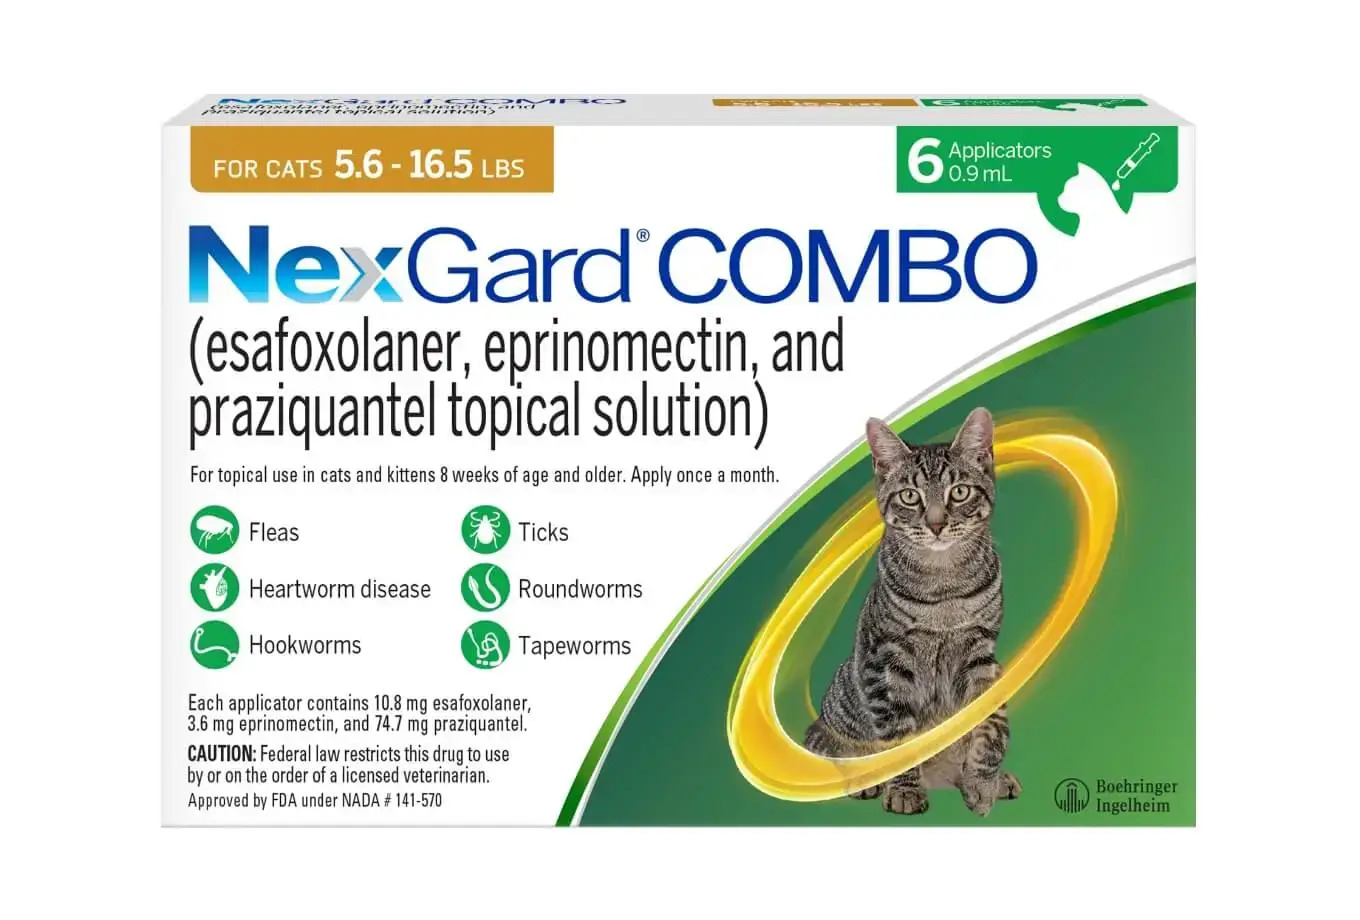 NexGard Combo Pack Shot. Features a cat on the front of the box